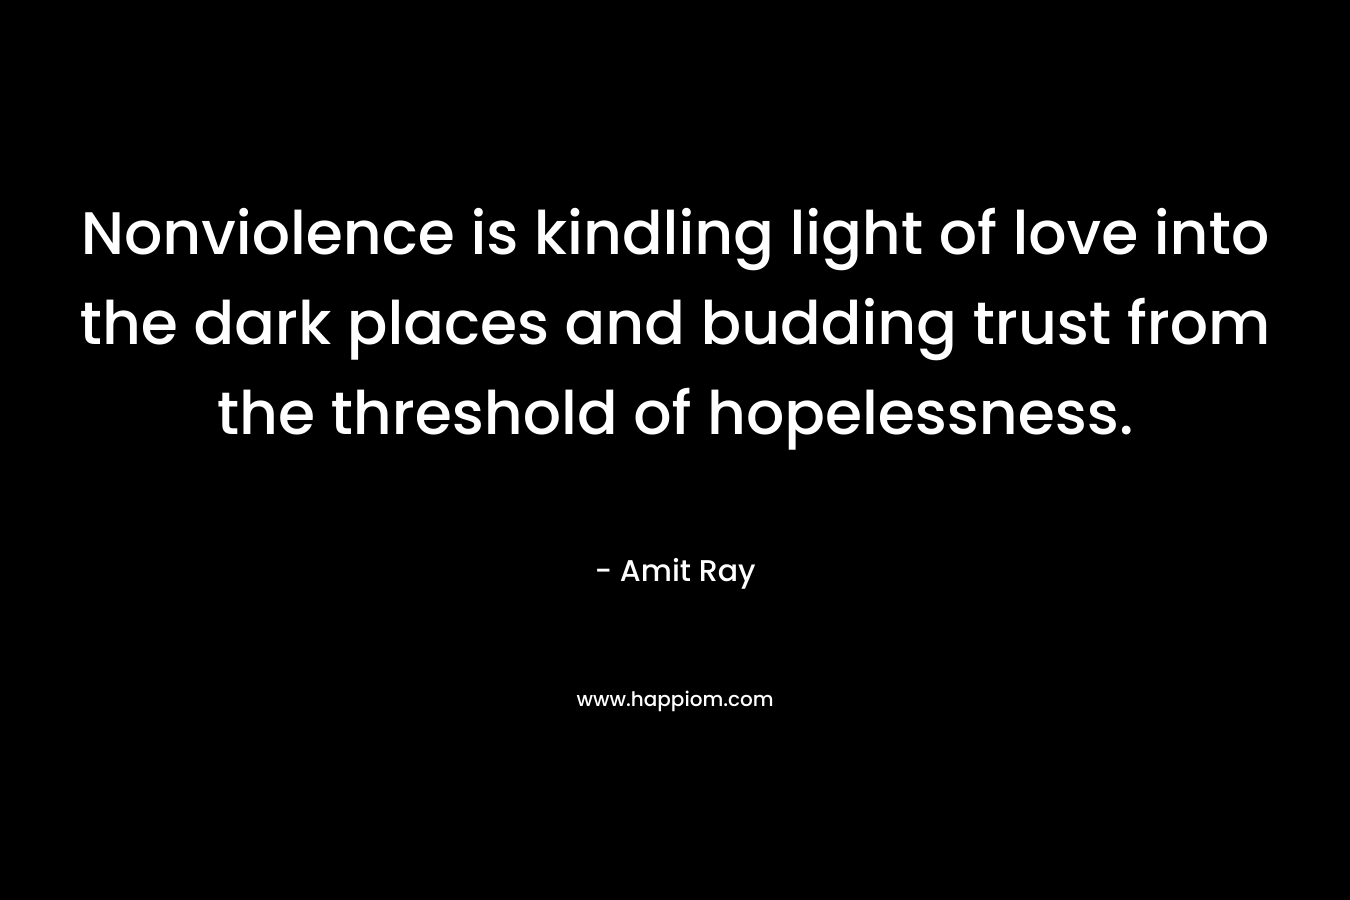 Nonviolence is kindling light of love into the dark places and budding trust from the threshold of hopelessness.